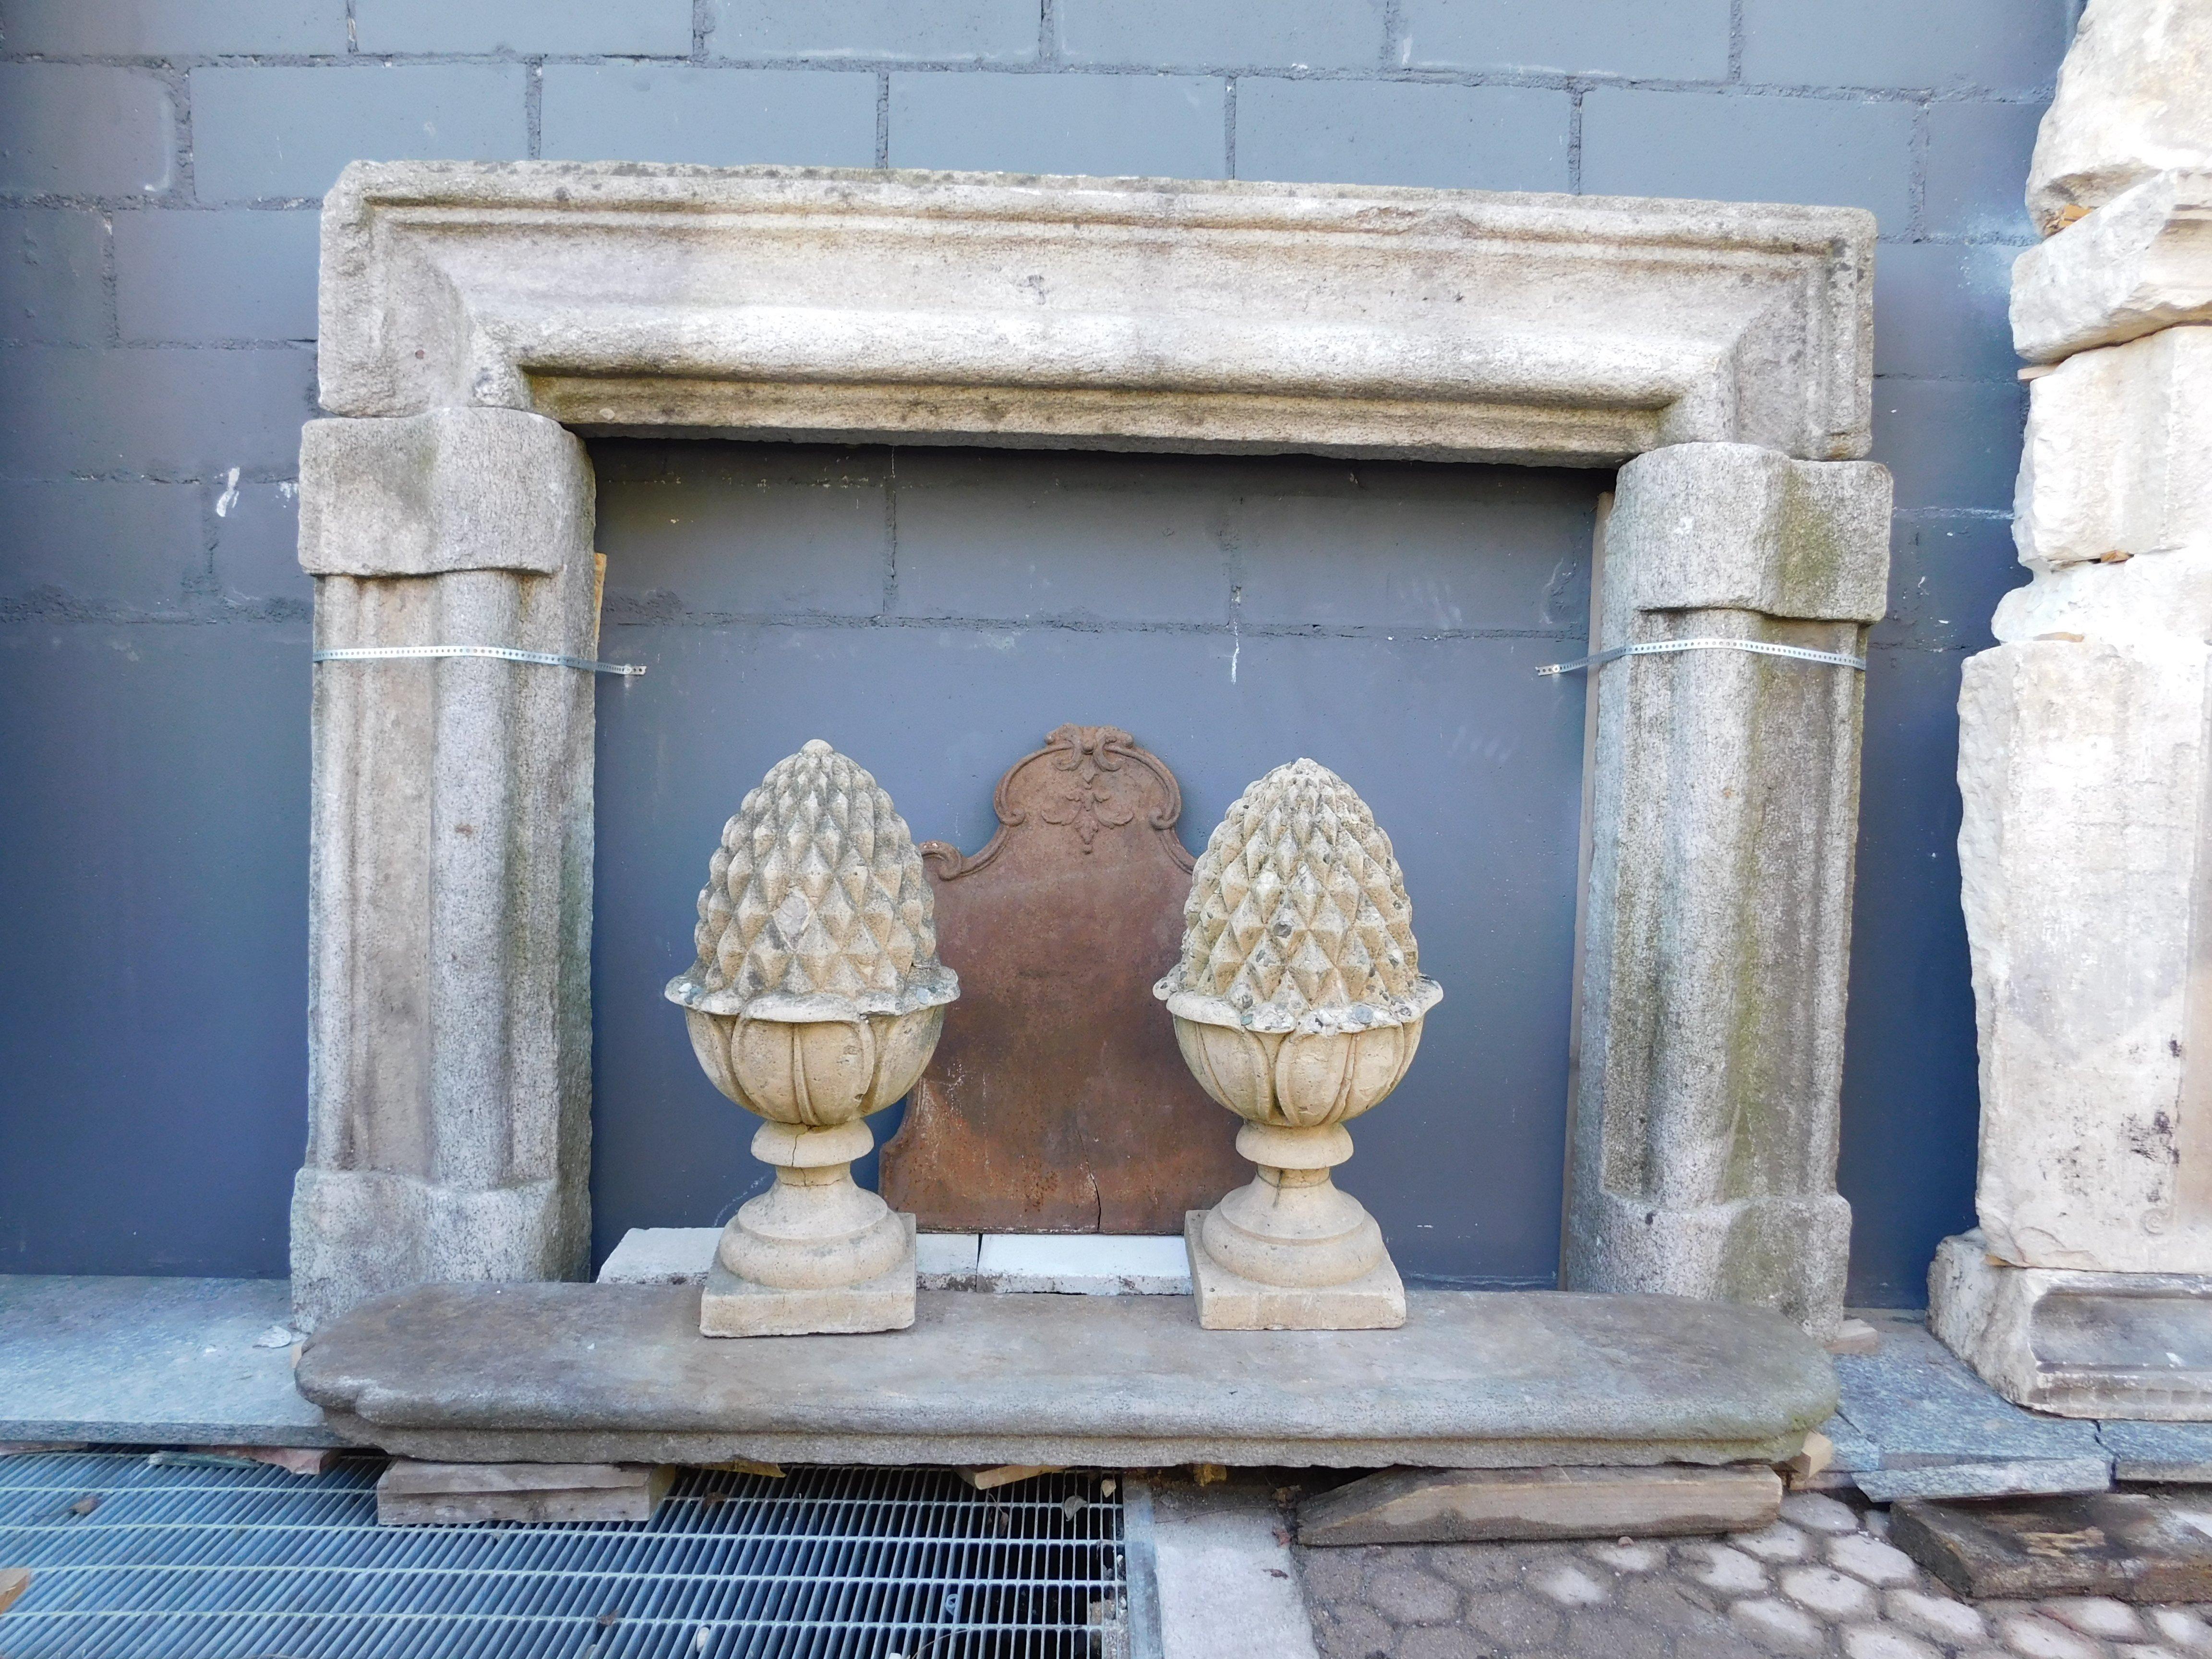 Antique fireplace mantle, hand-carved in gray stone, with the typical shape of the pink Salvator fireplaces, taking up the frame of the famous painter, original fireplace from the 1600s, built for an important building in central Italy